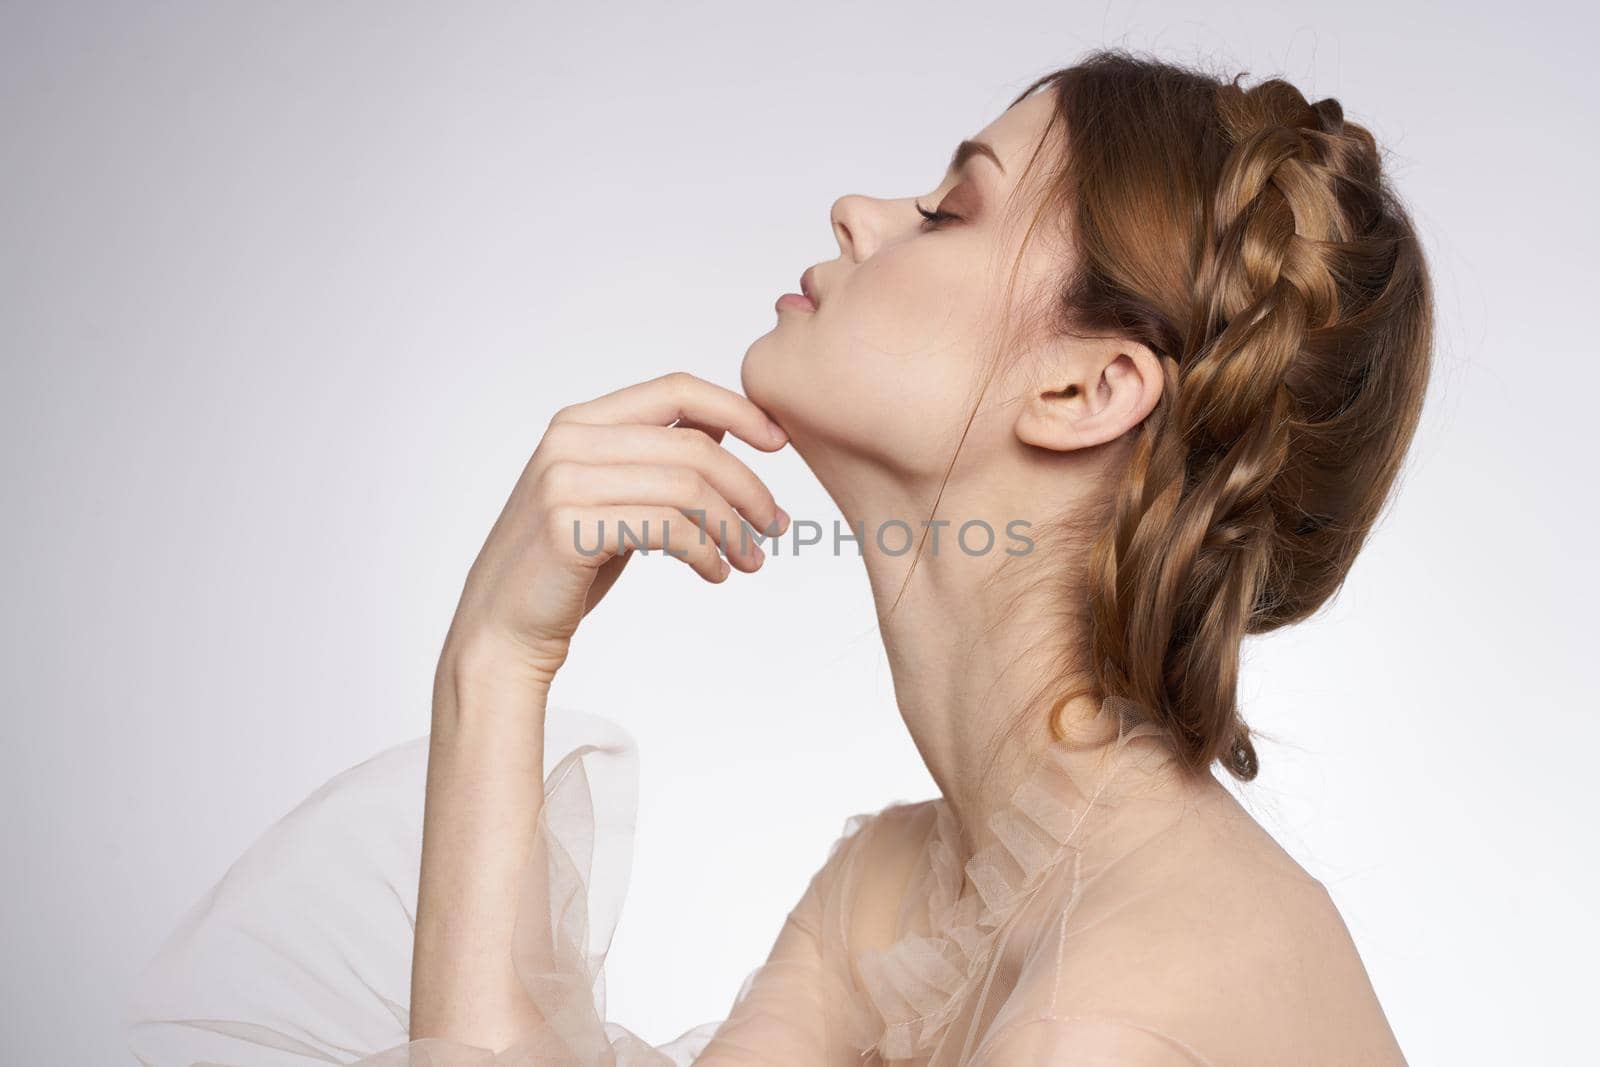 portrait of a woman hairstyle fun posing cosmetics fashion light background. High quality photo